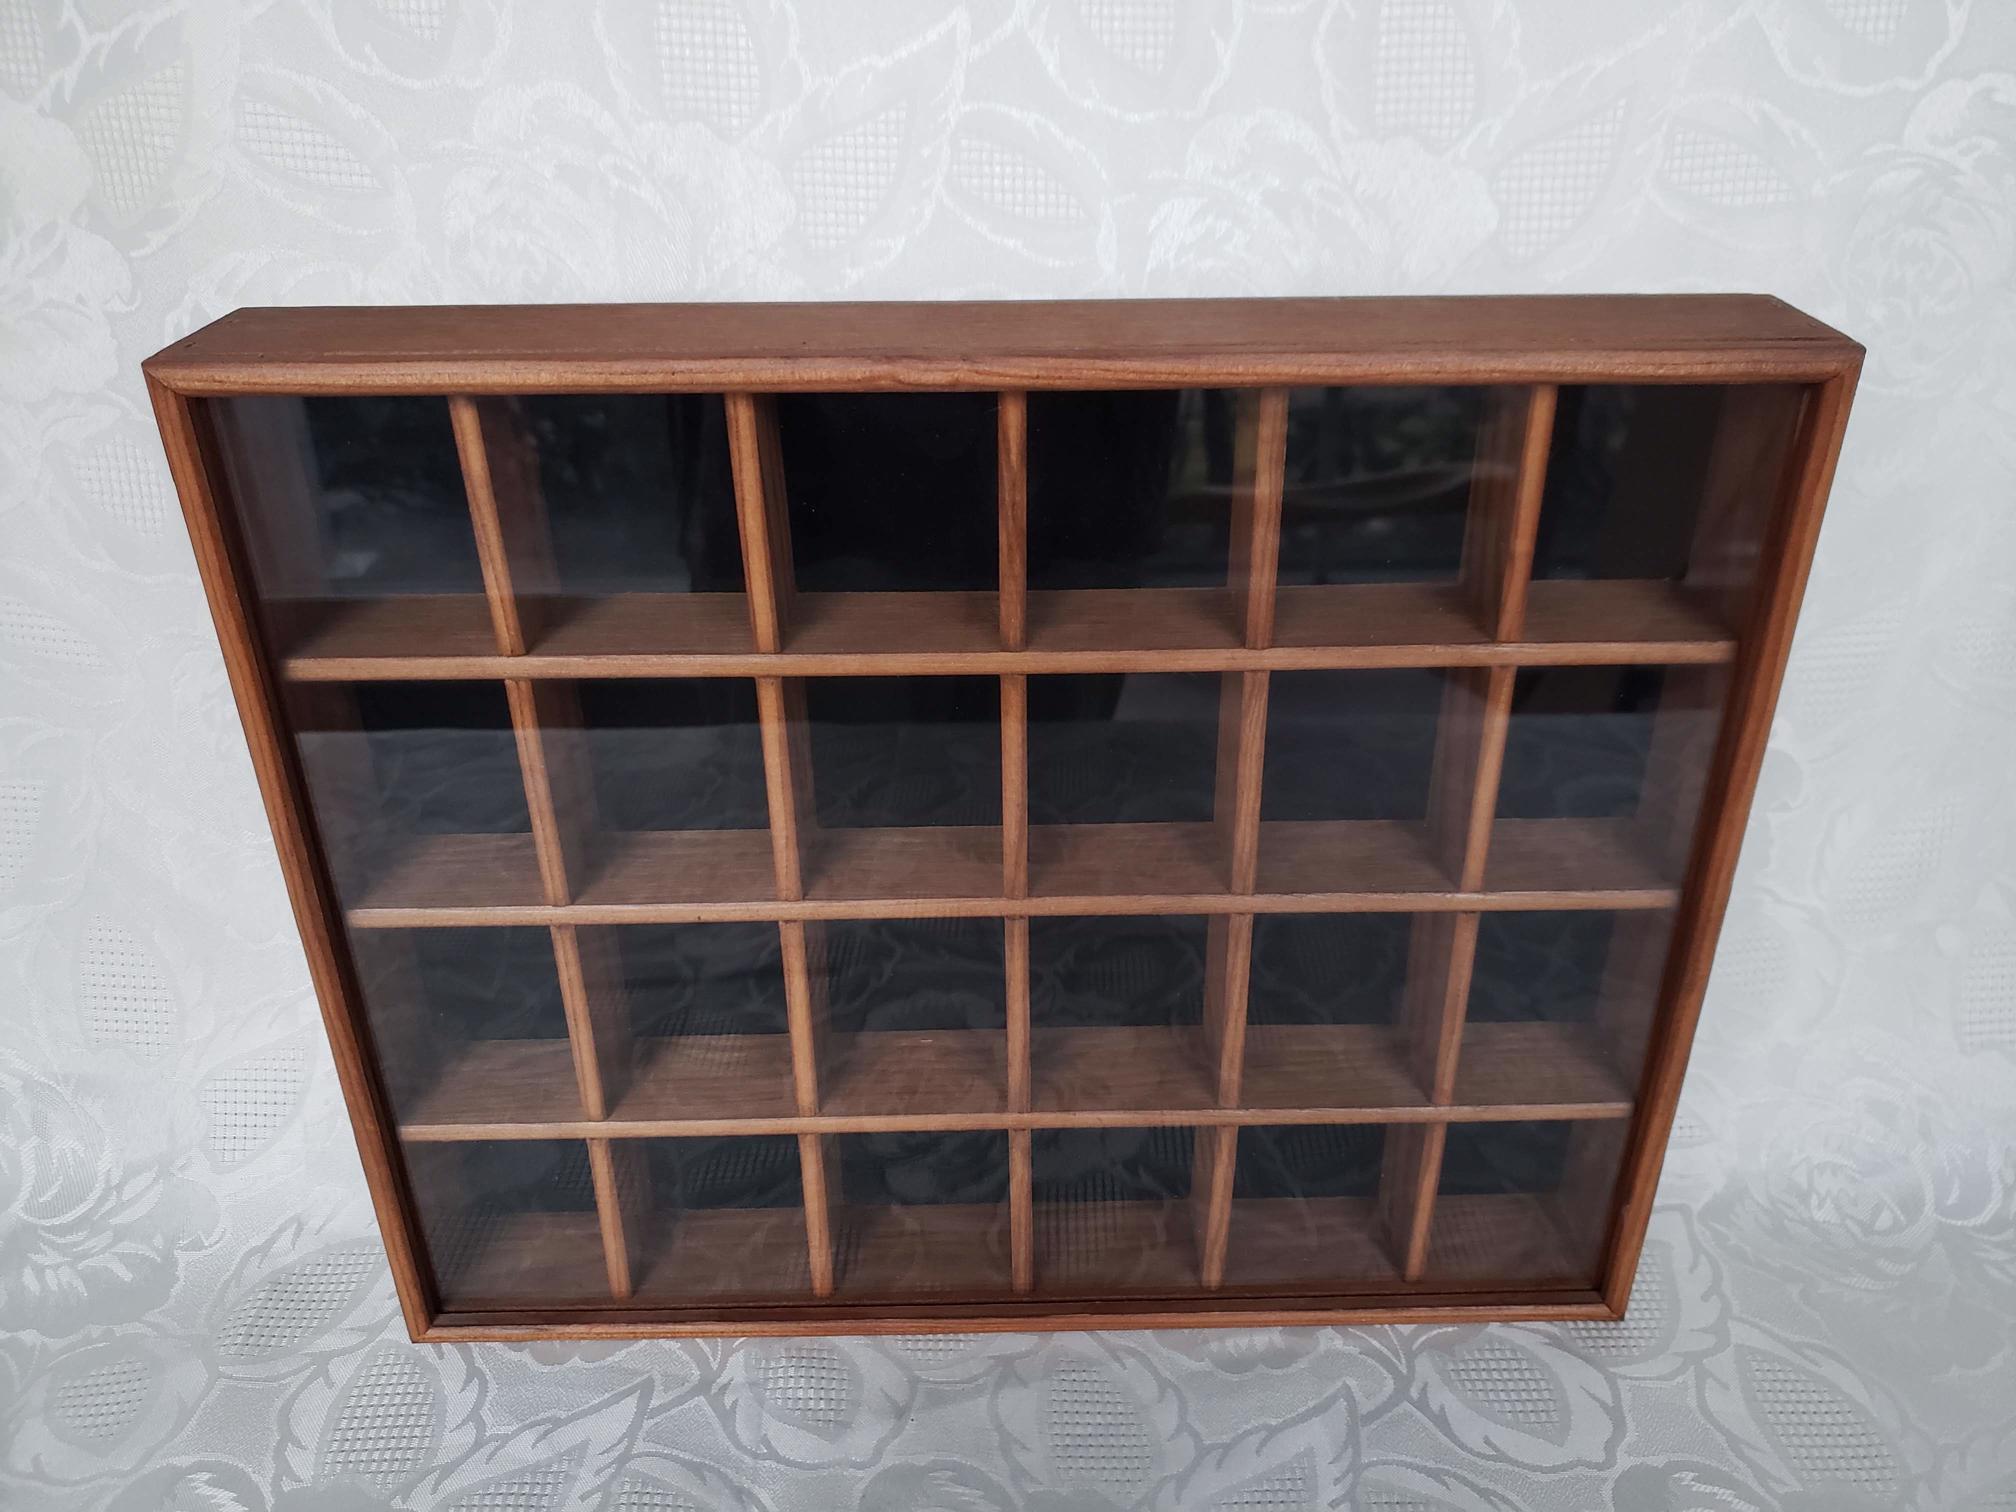 Thimble display case with 48 china thimbles solid case wooden